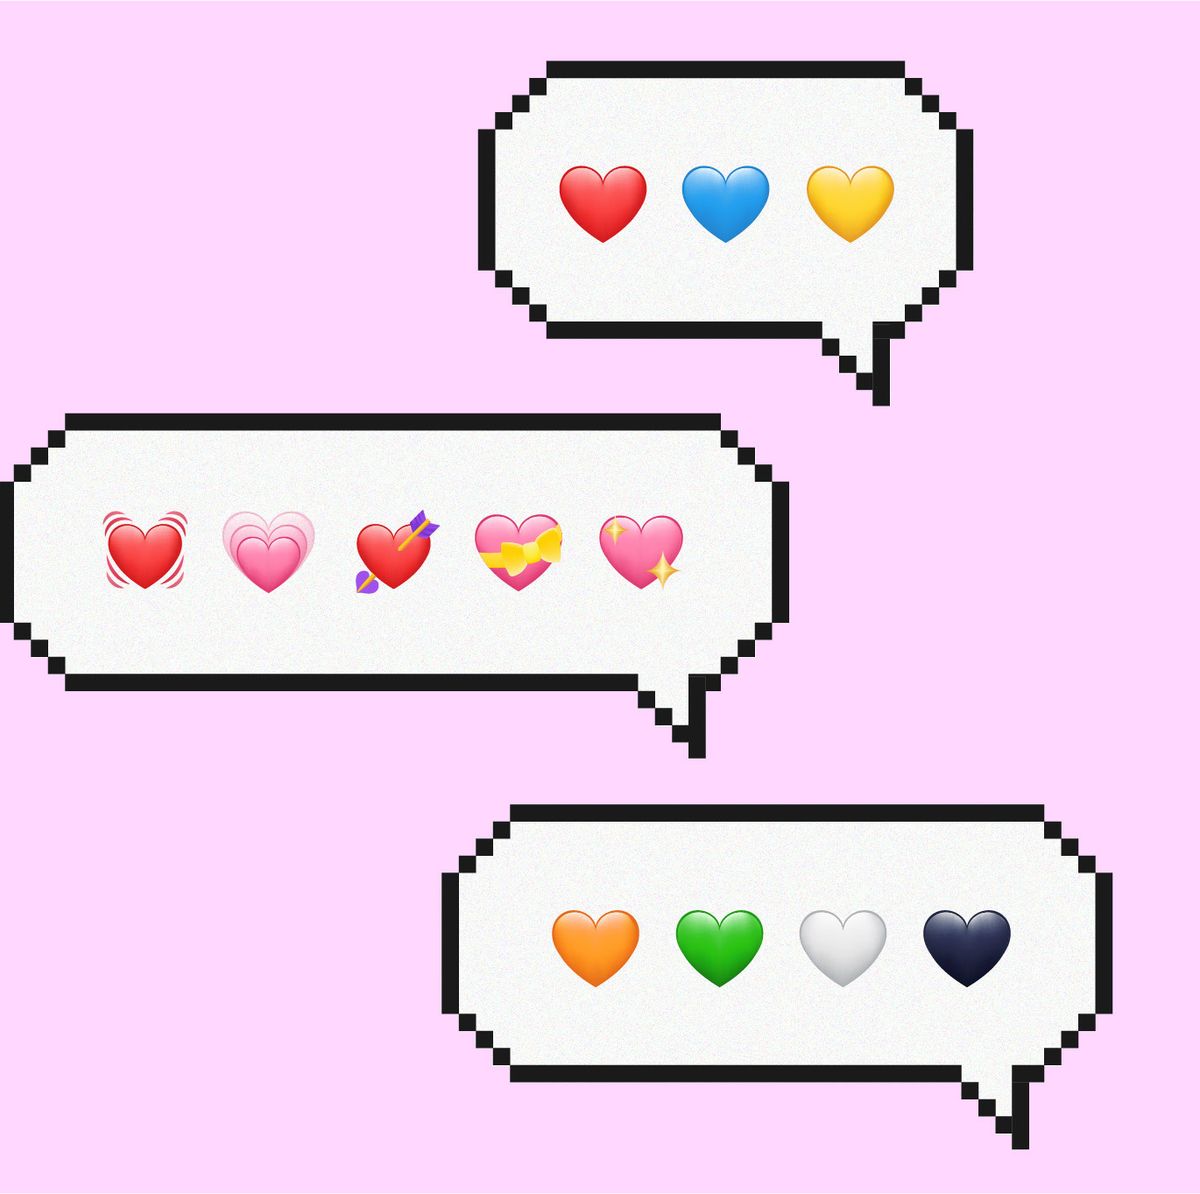 What Do the Heart Emojis Mean? - What Does This Mean in Texting?